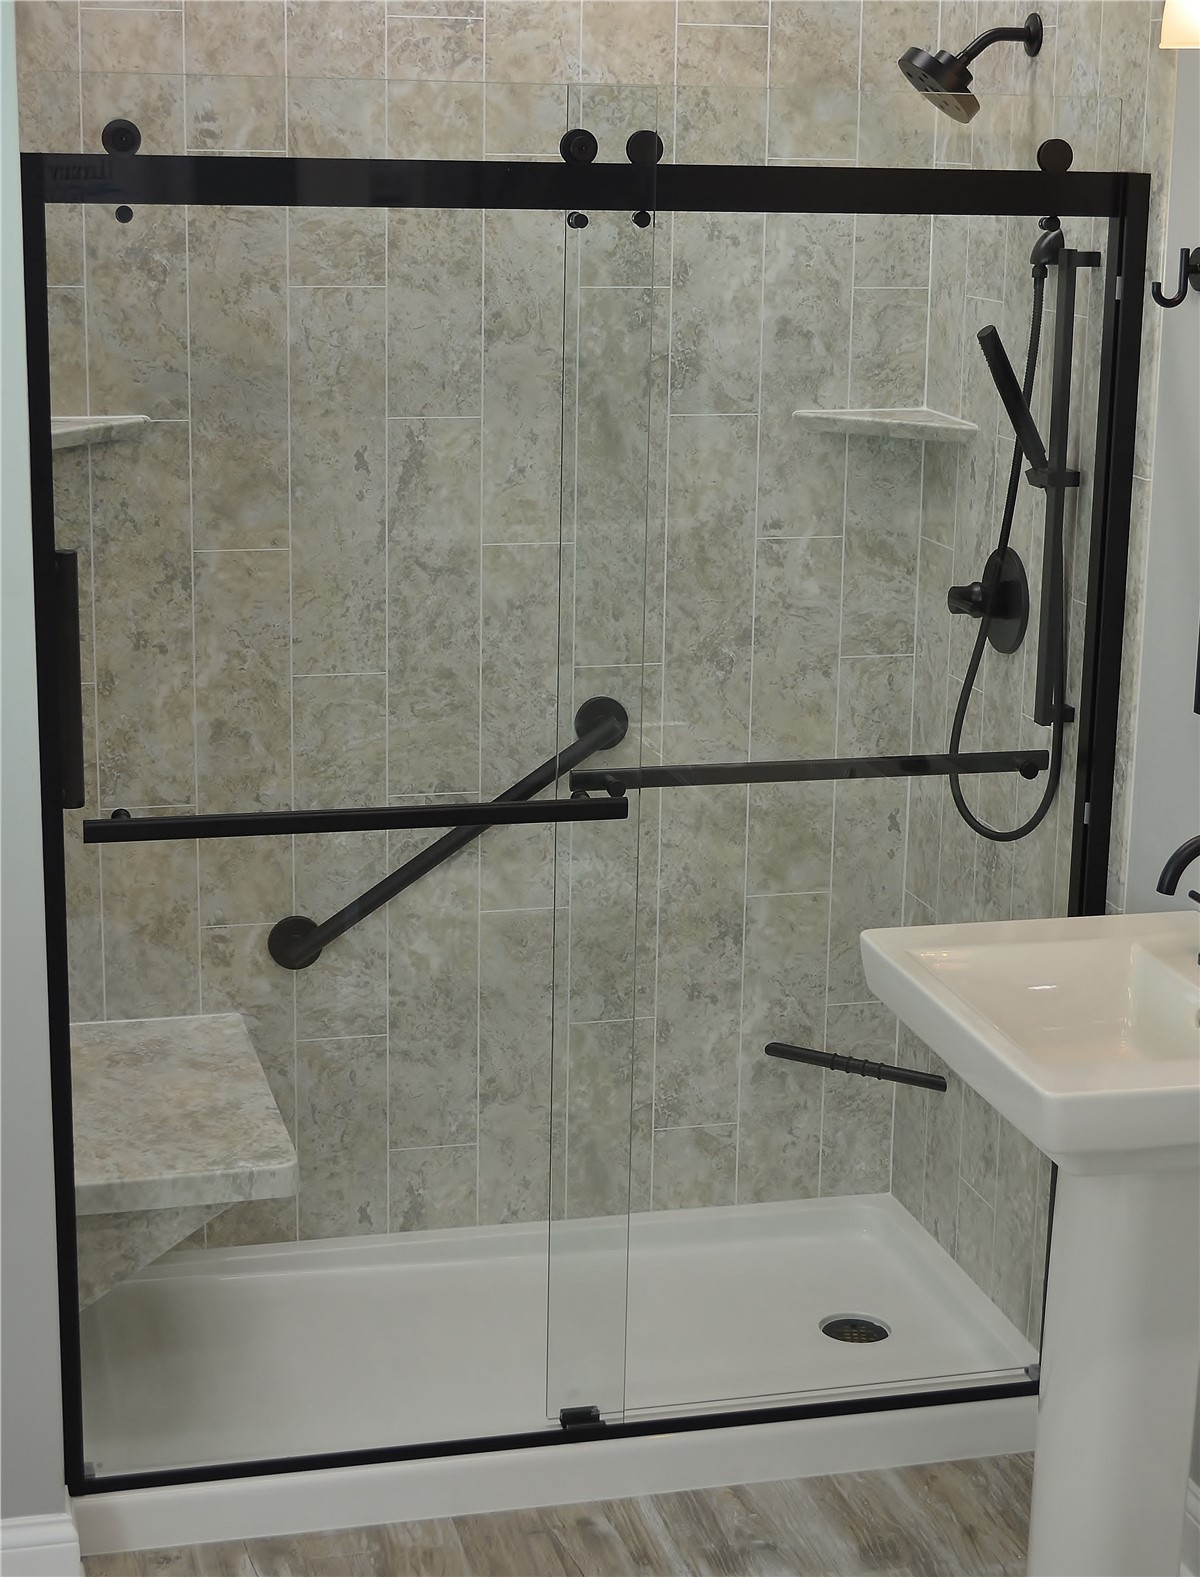 Barrier free shower installation charlotte nc reviews